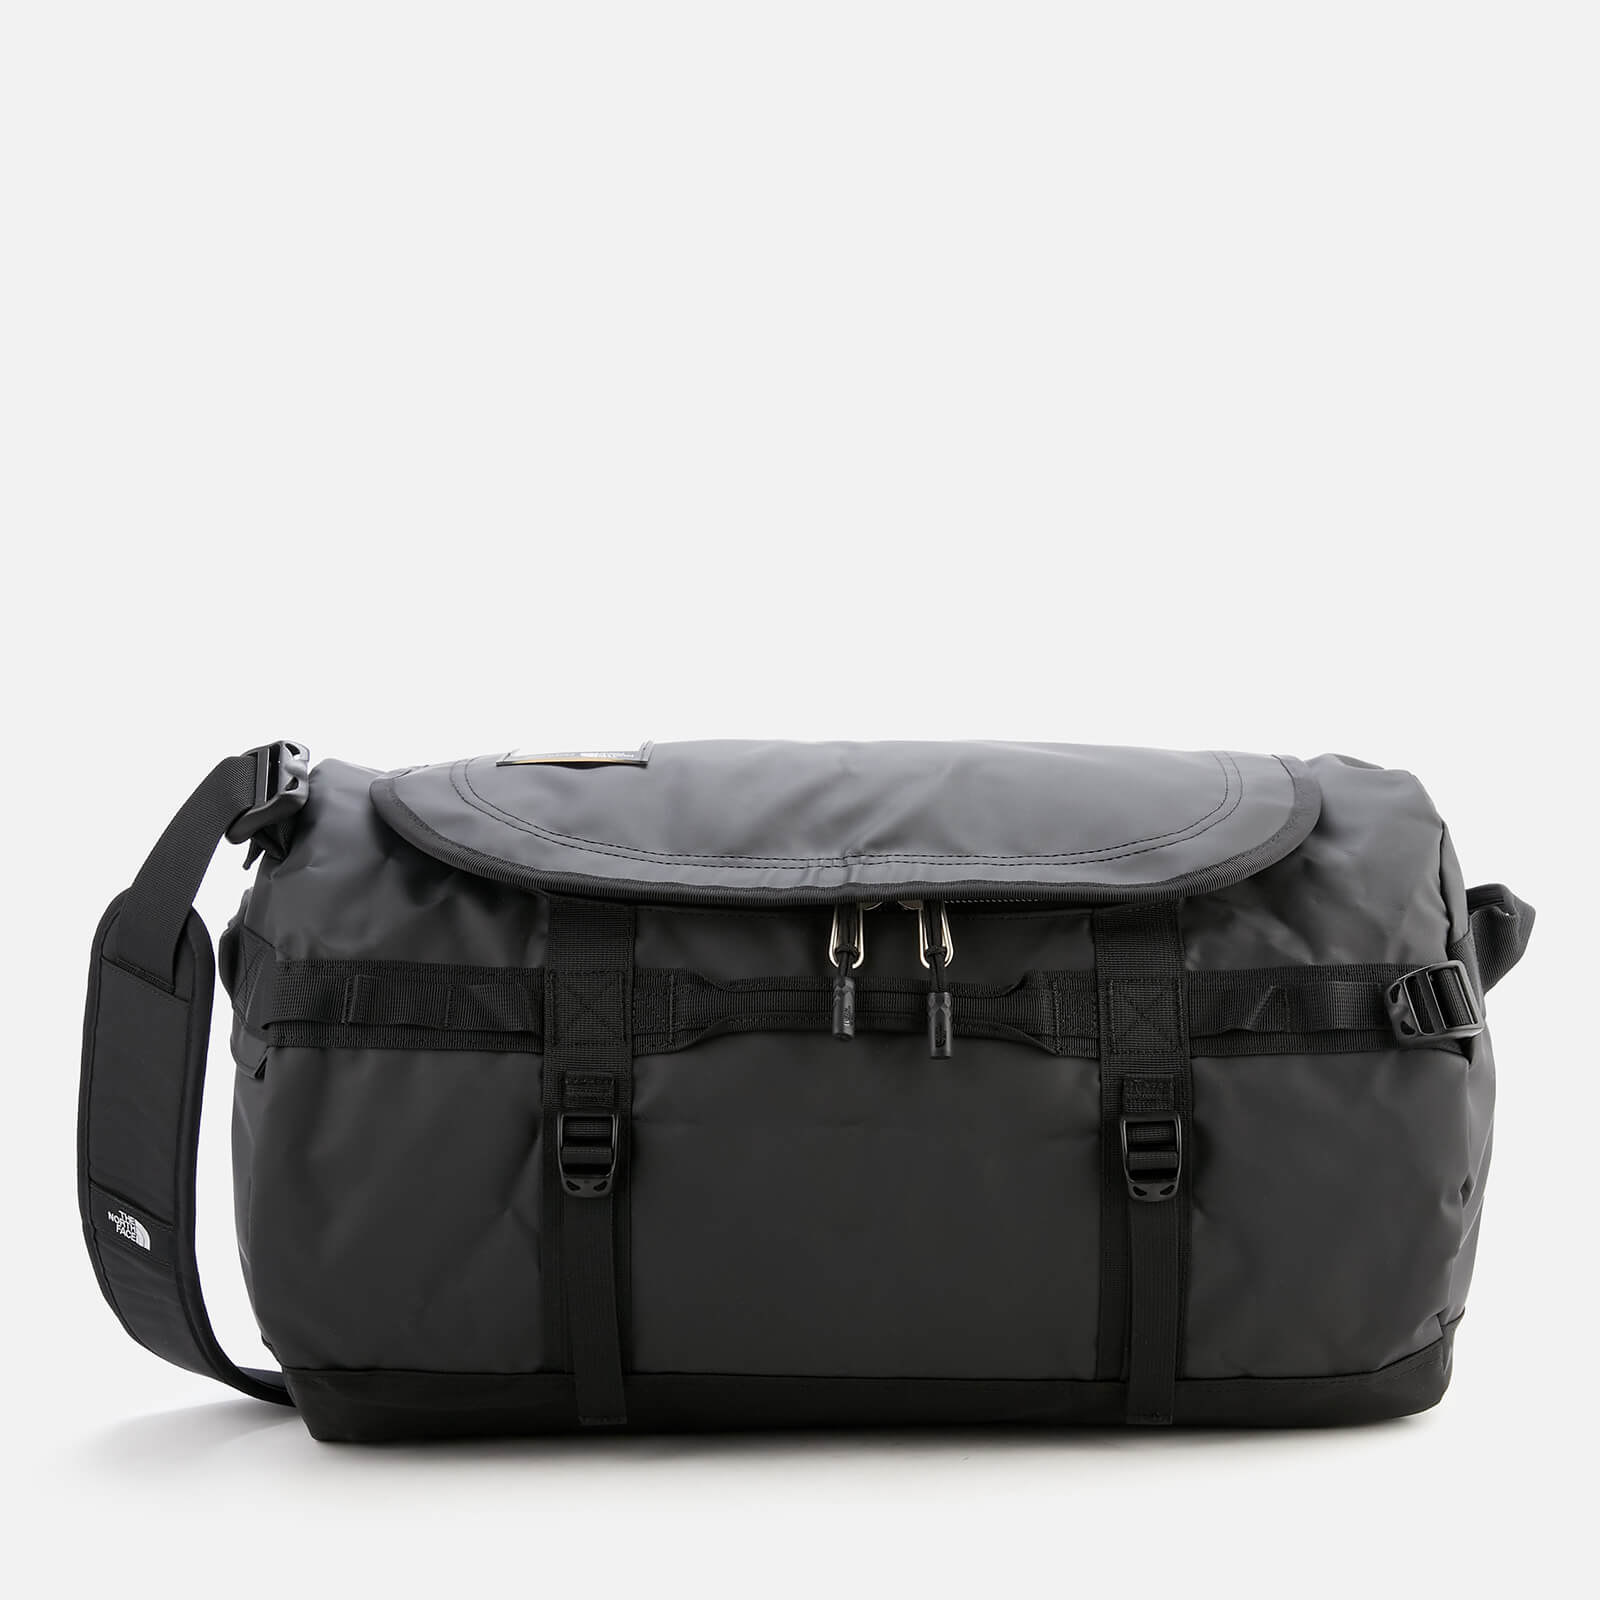 The North Face Duffel Bag Black Online Shopping For Women Men Kids Fashion Lifestyle Free Delivery Returns